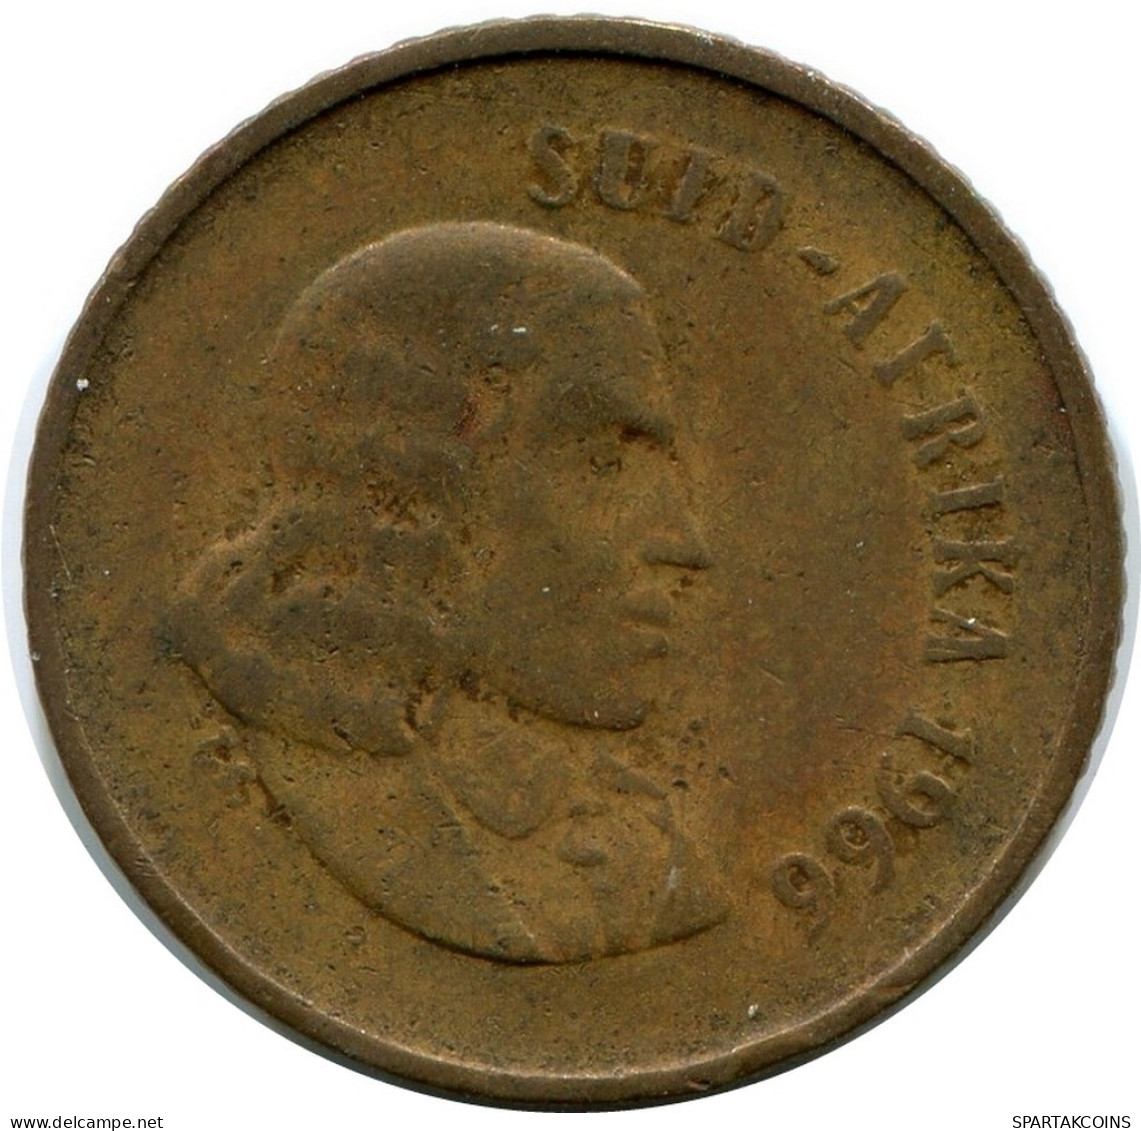 1 CENT 1966 SOUTH AFRICA Coin #AX167.U.A - South Africa